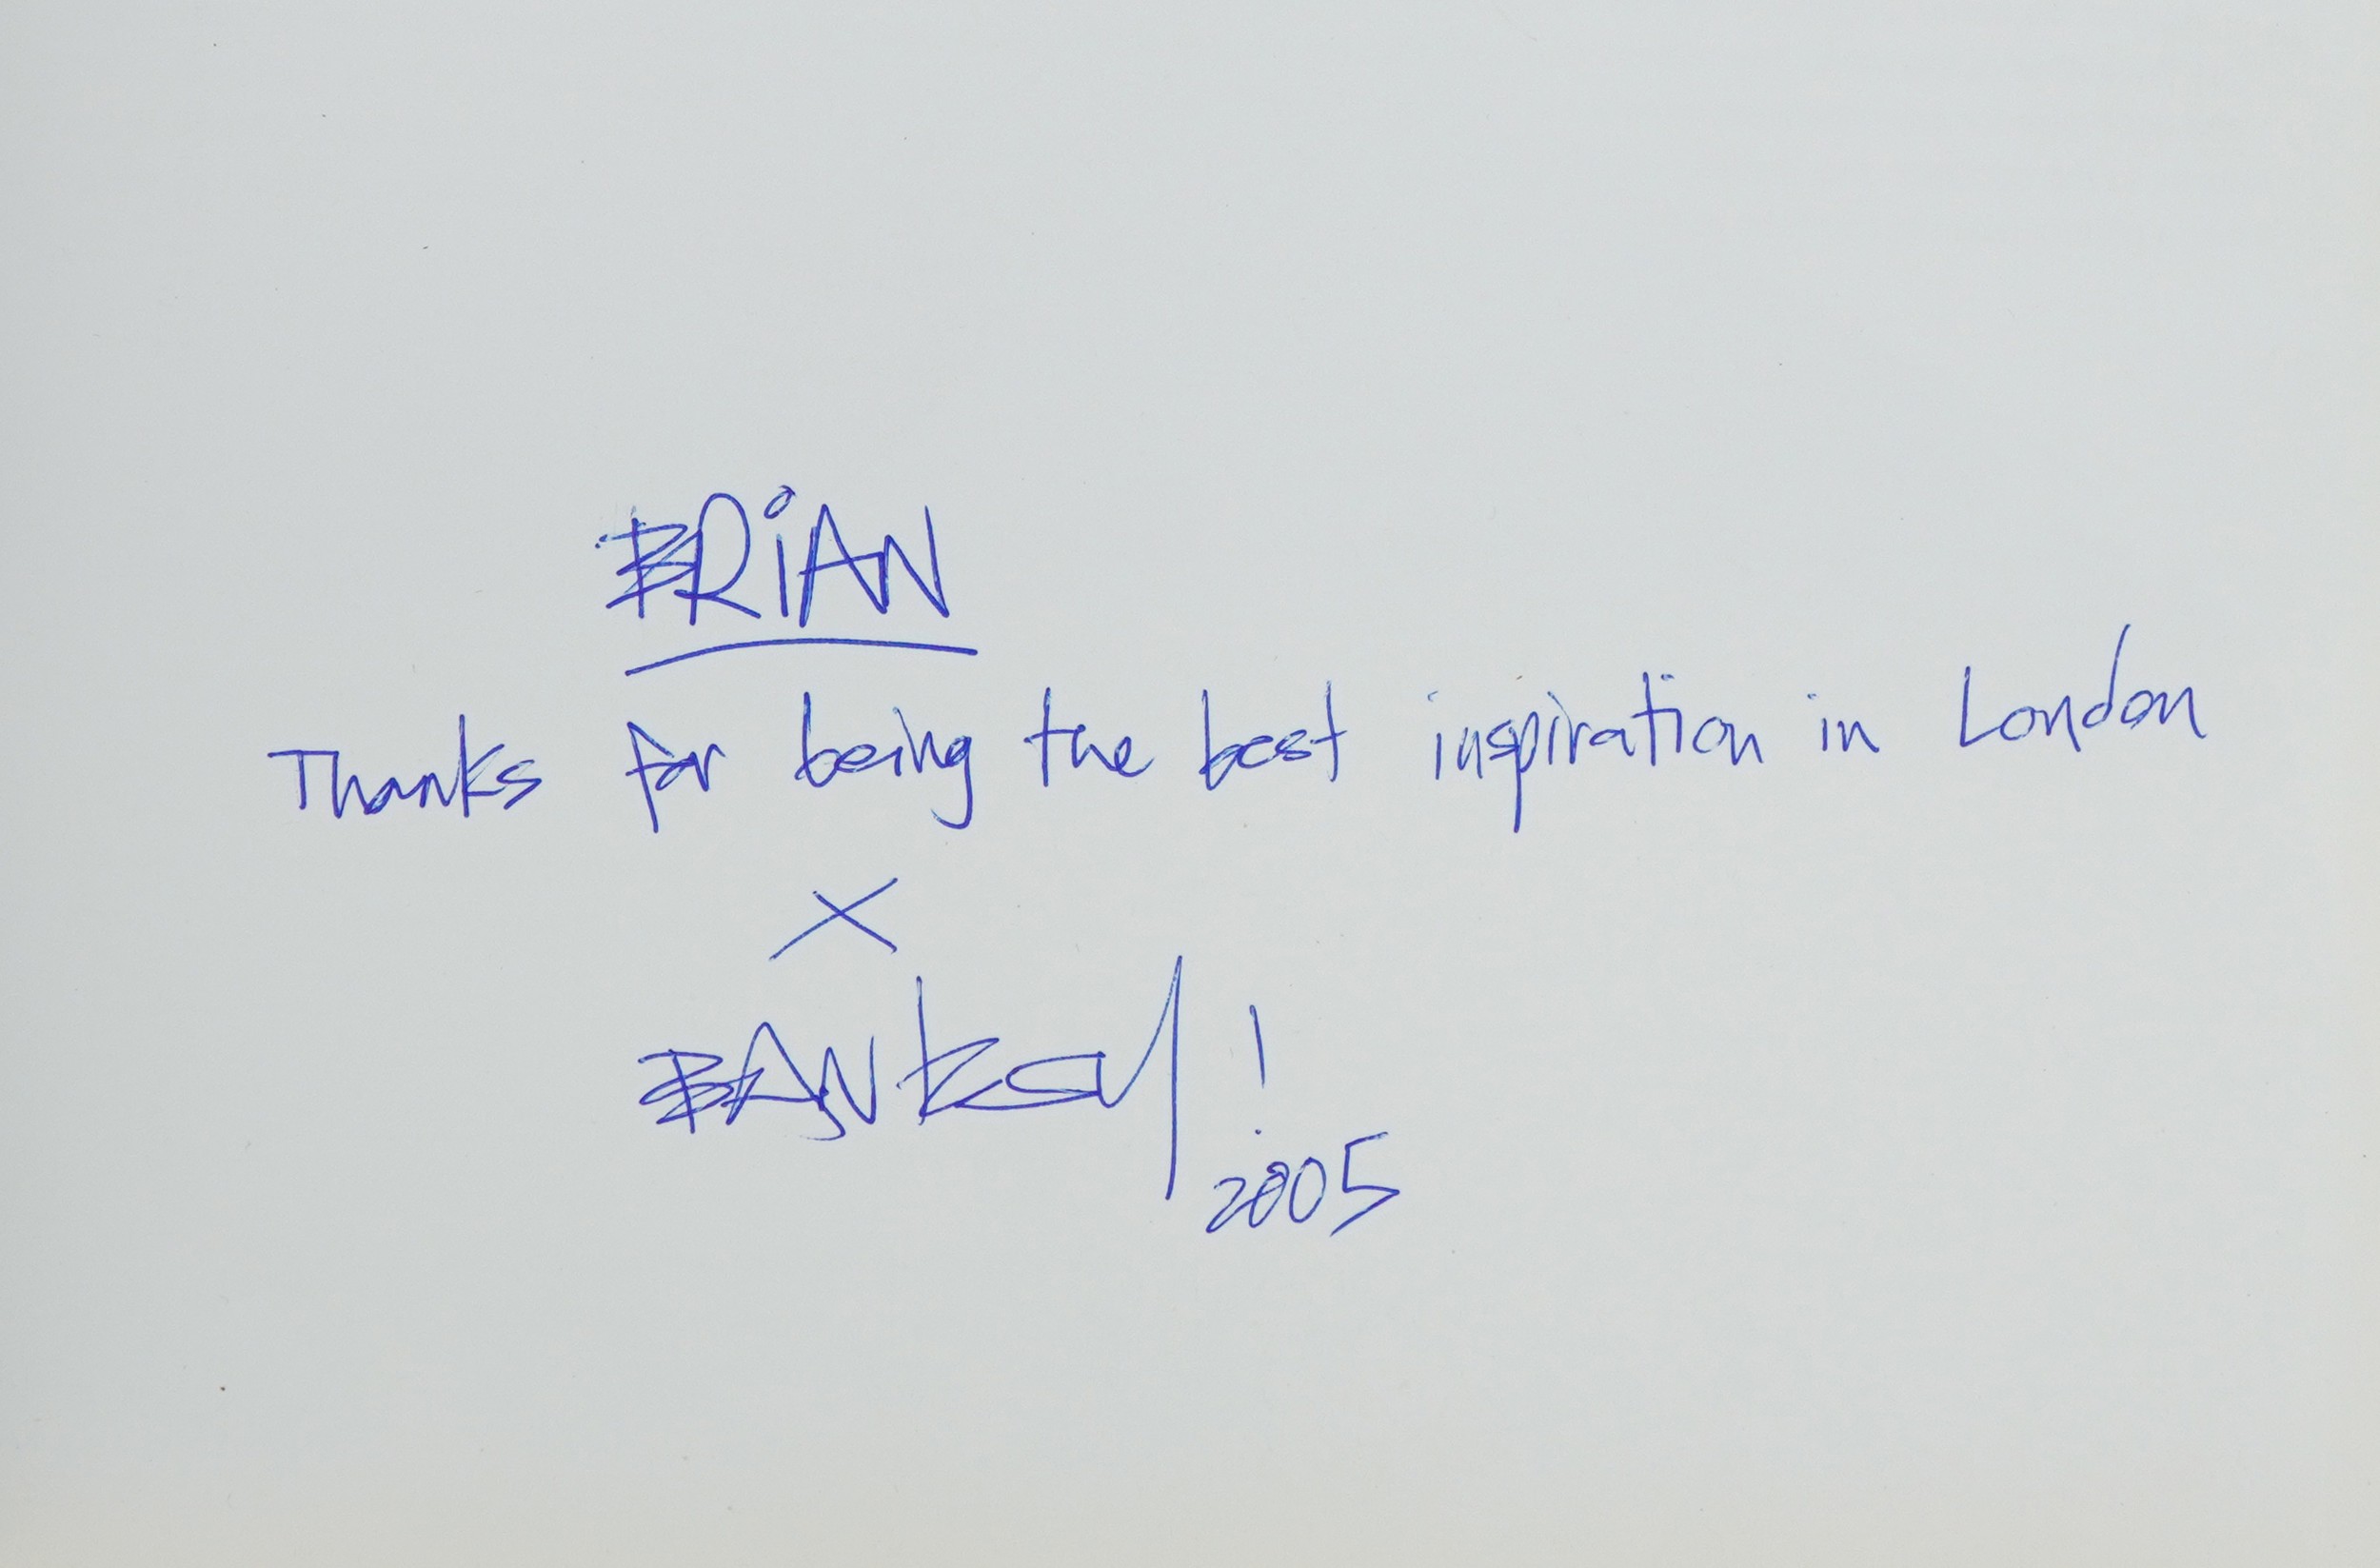 The message from Banksy to Brian Haw